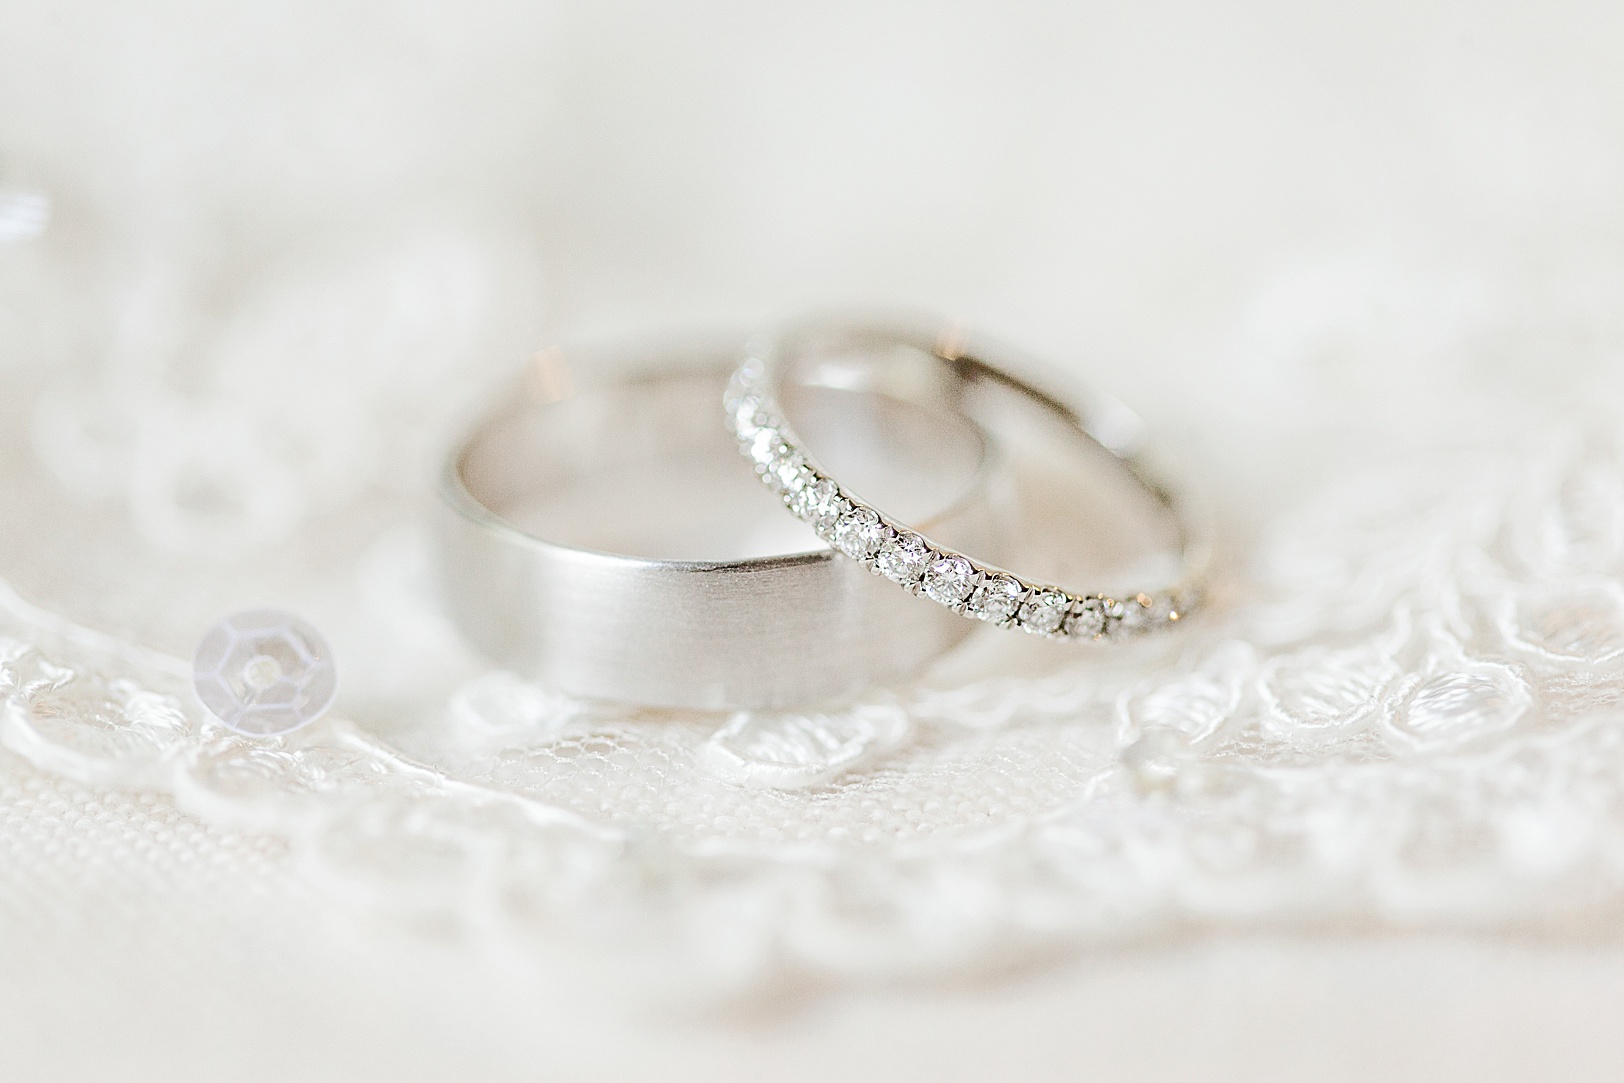 Wedding Rings on Lace | Detail Shot by Kaitlin Scott